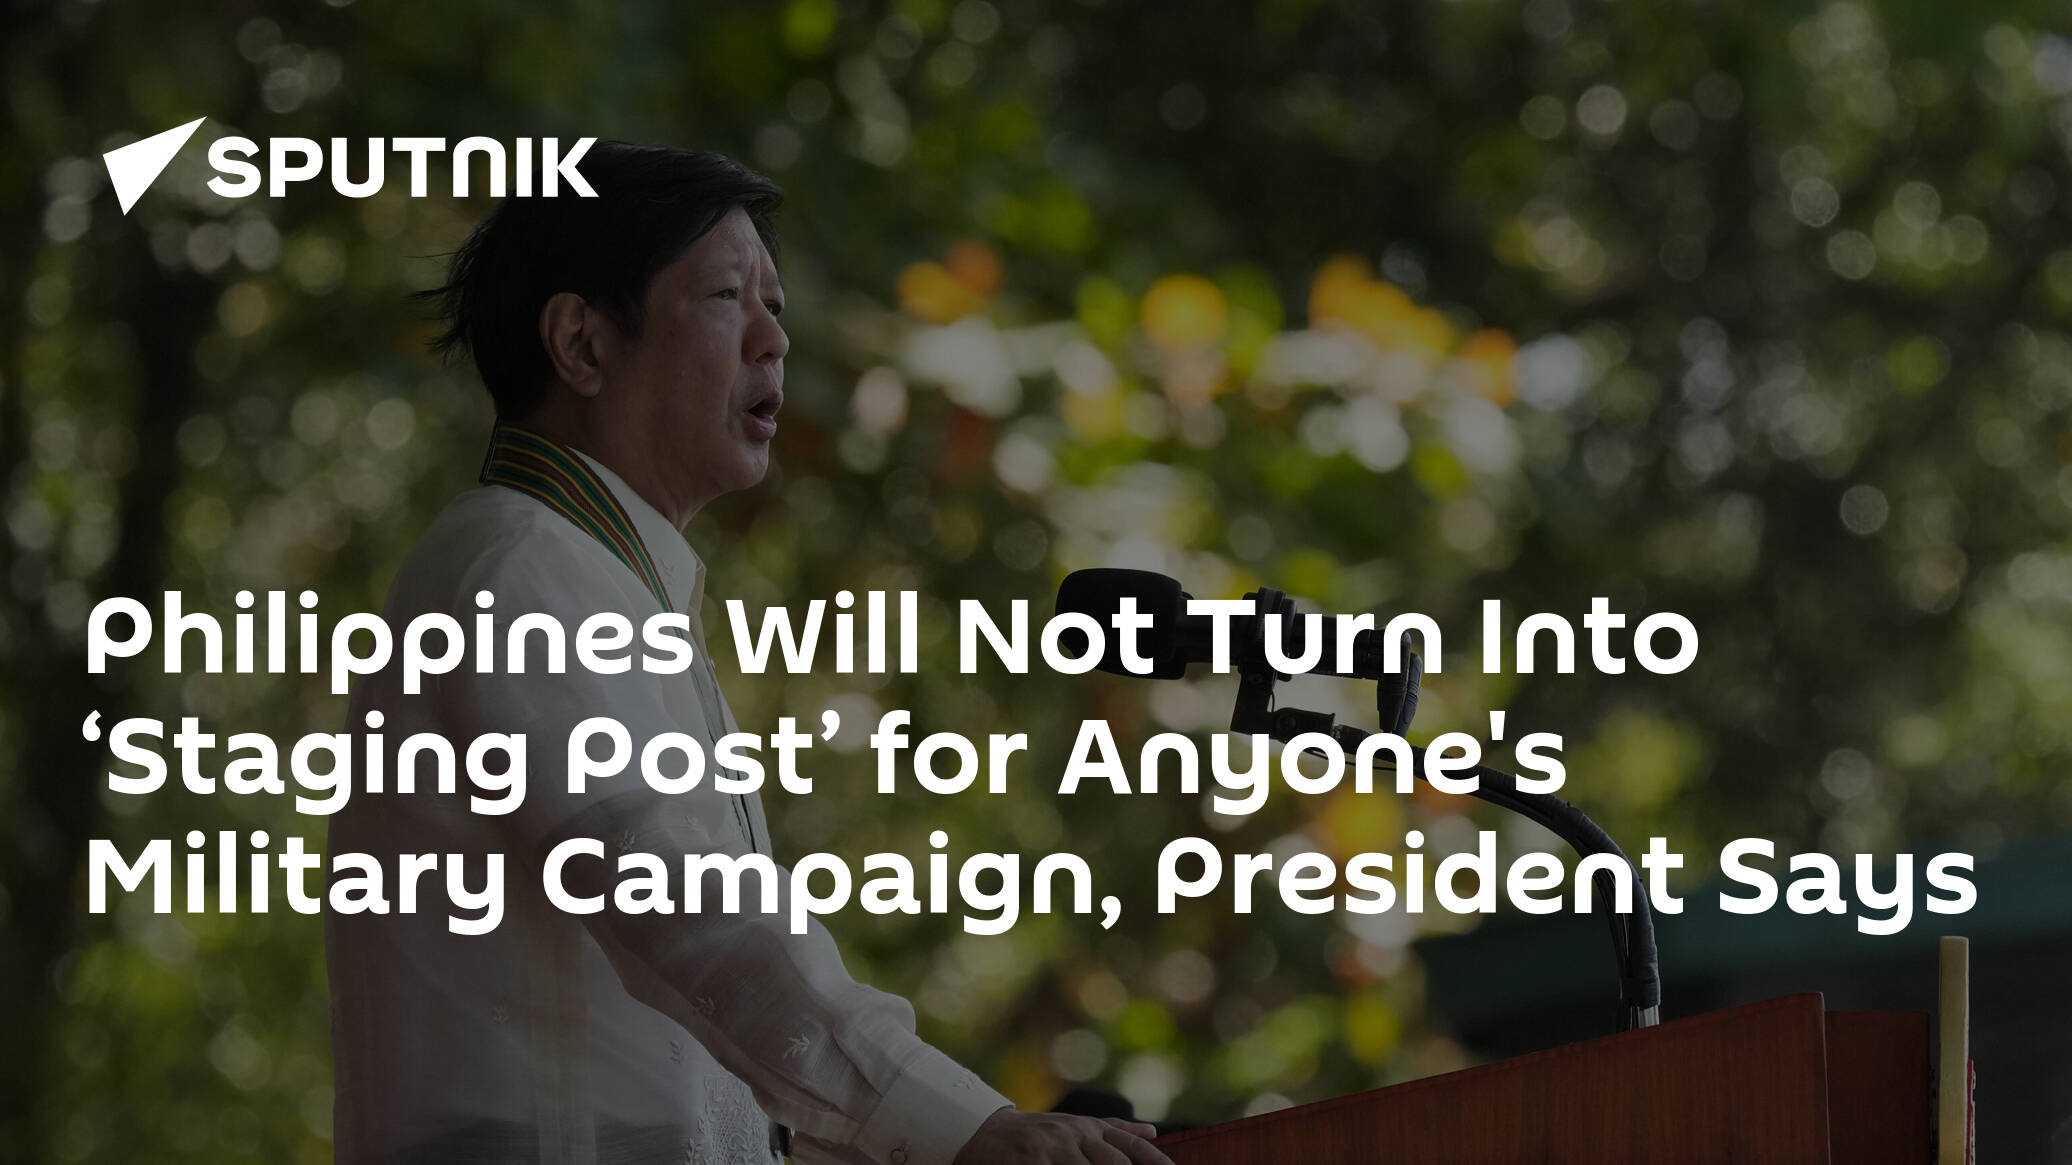 Philippines Will Not Turn Into ‘Staging Post’ for Anyone's Military Campaign, President Says